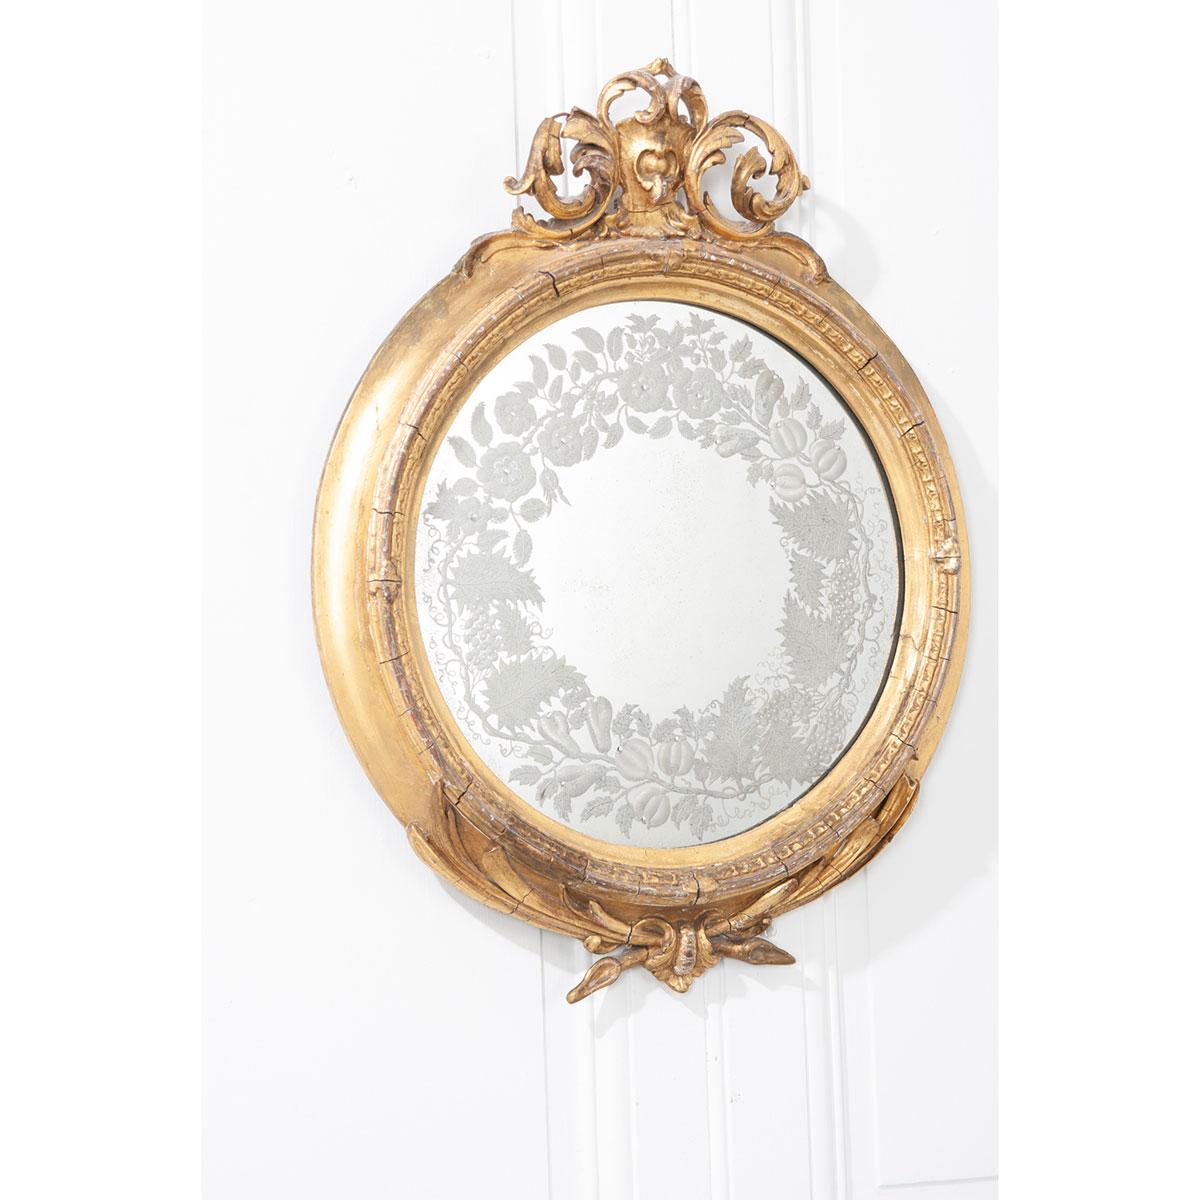 A French 19th century round gold gilt mirror, with original engraved mirror plate. The plate features flowers, fruit, leaves, and curled tendrils that have been artfully etched into the glass. The frame is adorned with intricate carvings across the